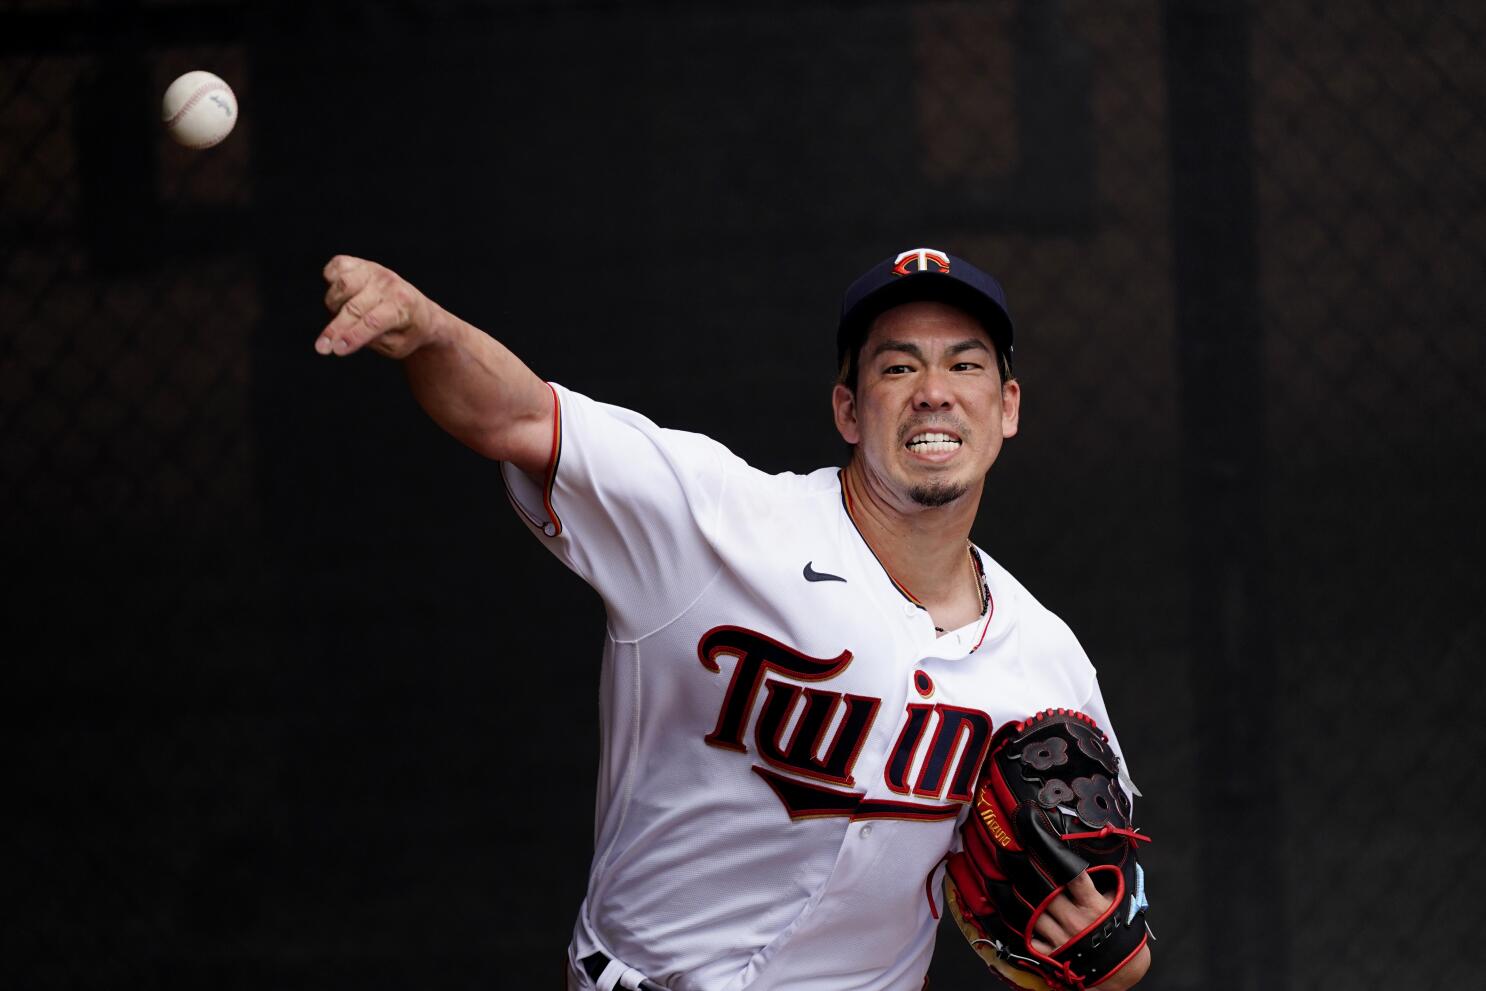 Kenta Maeda finds a new start this season with Twins